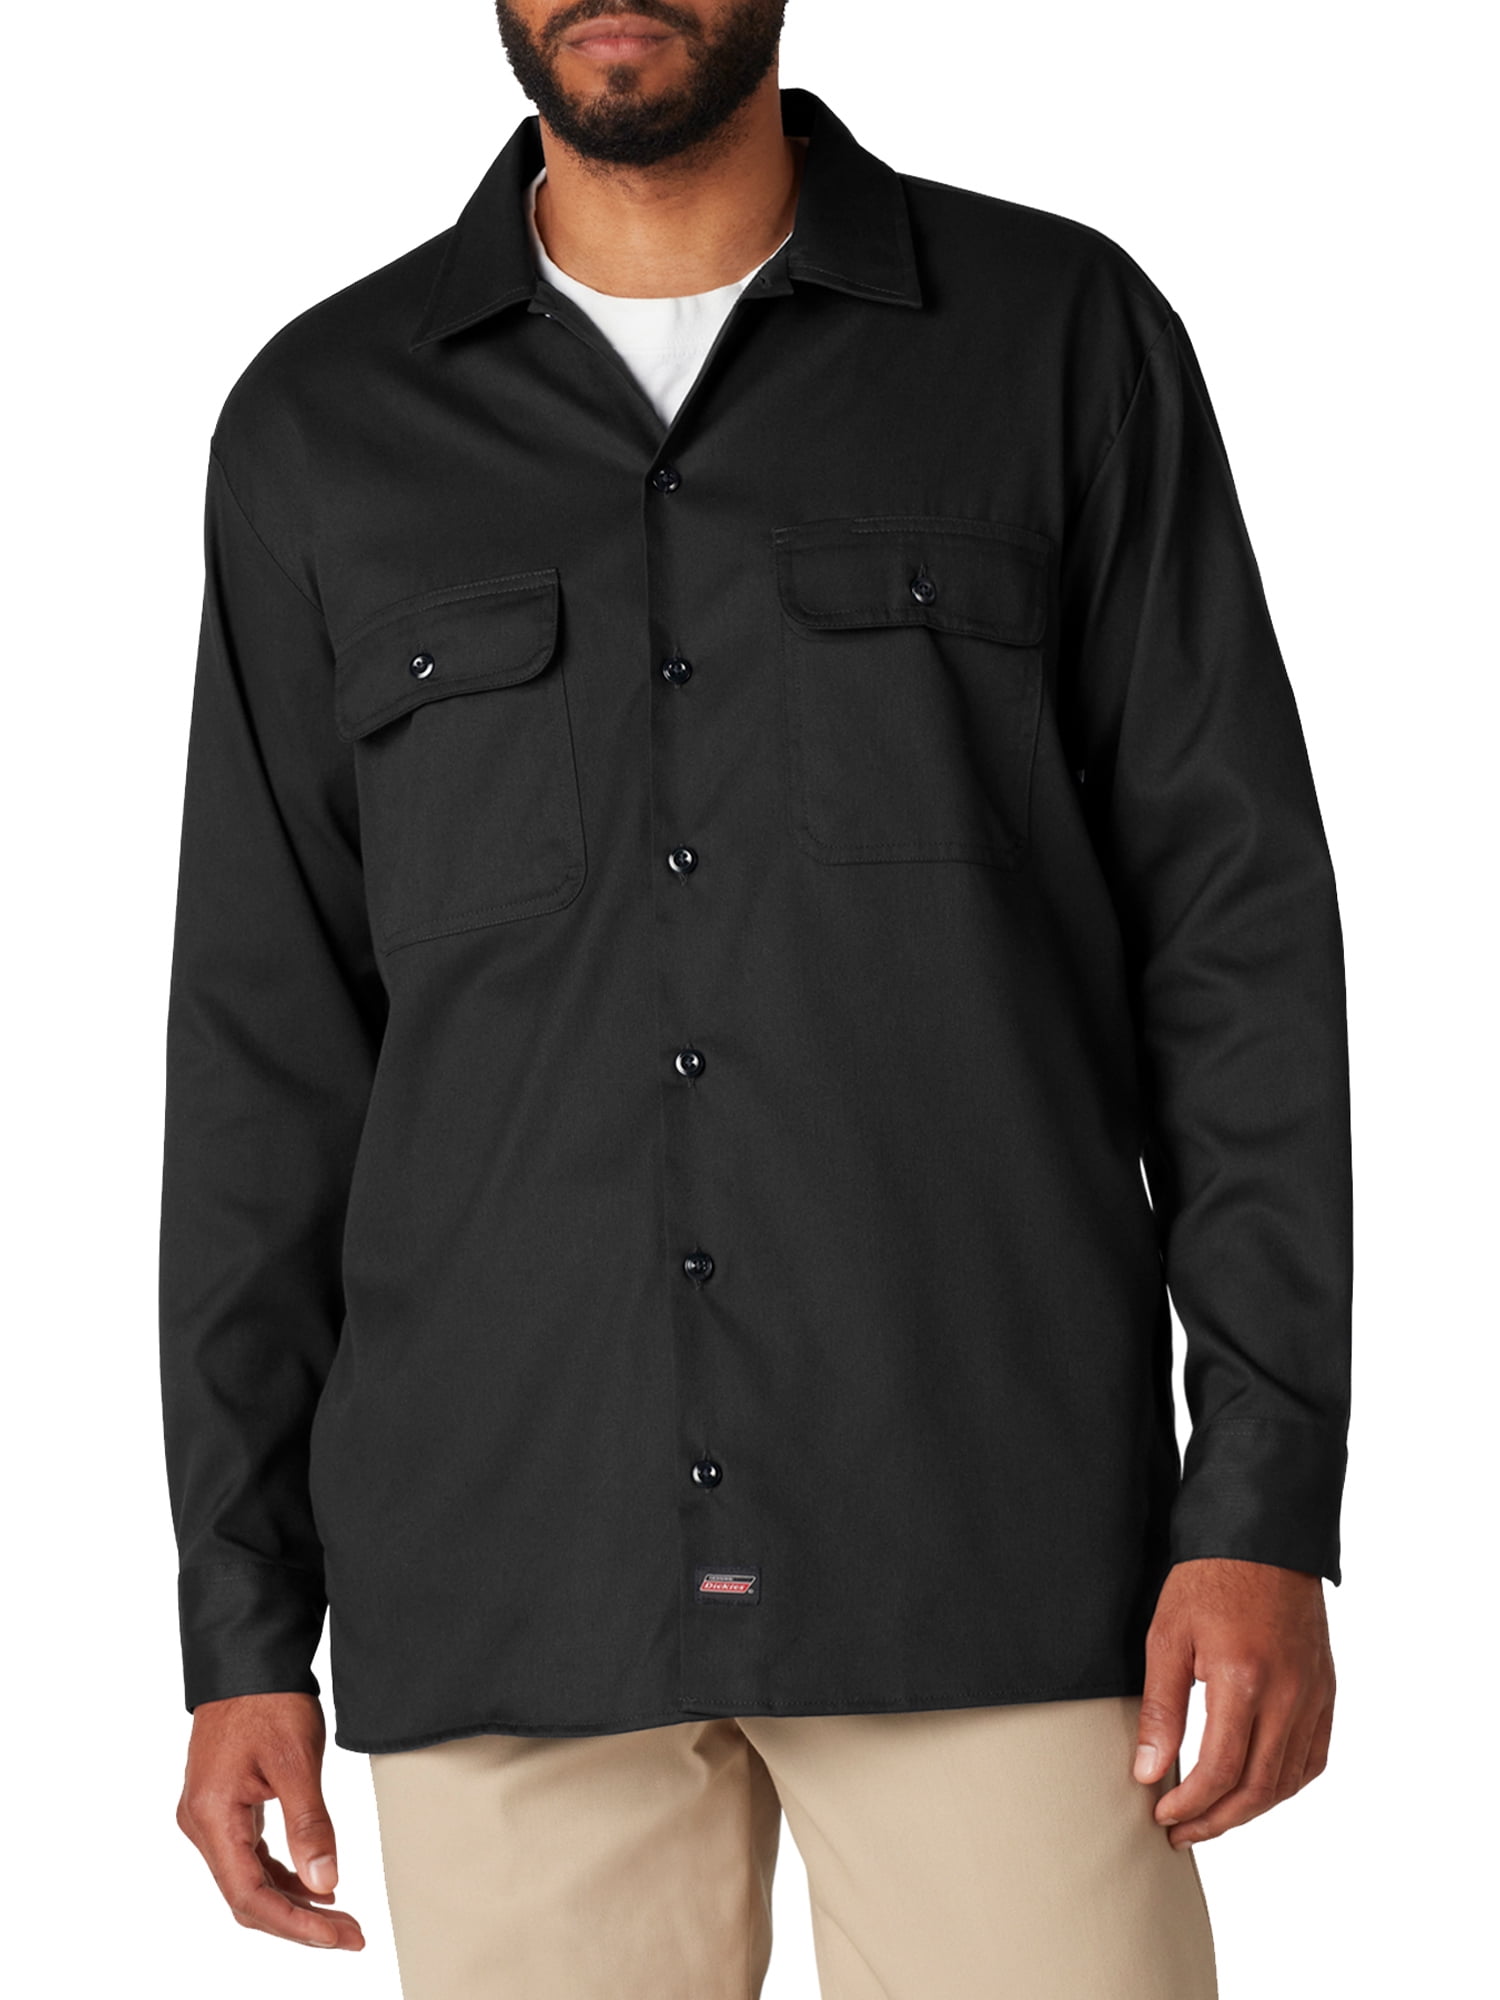 Dickies Mens Long Sleeve Cooling Shirt with Xylitol 